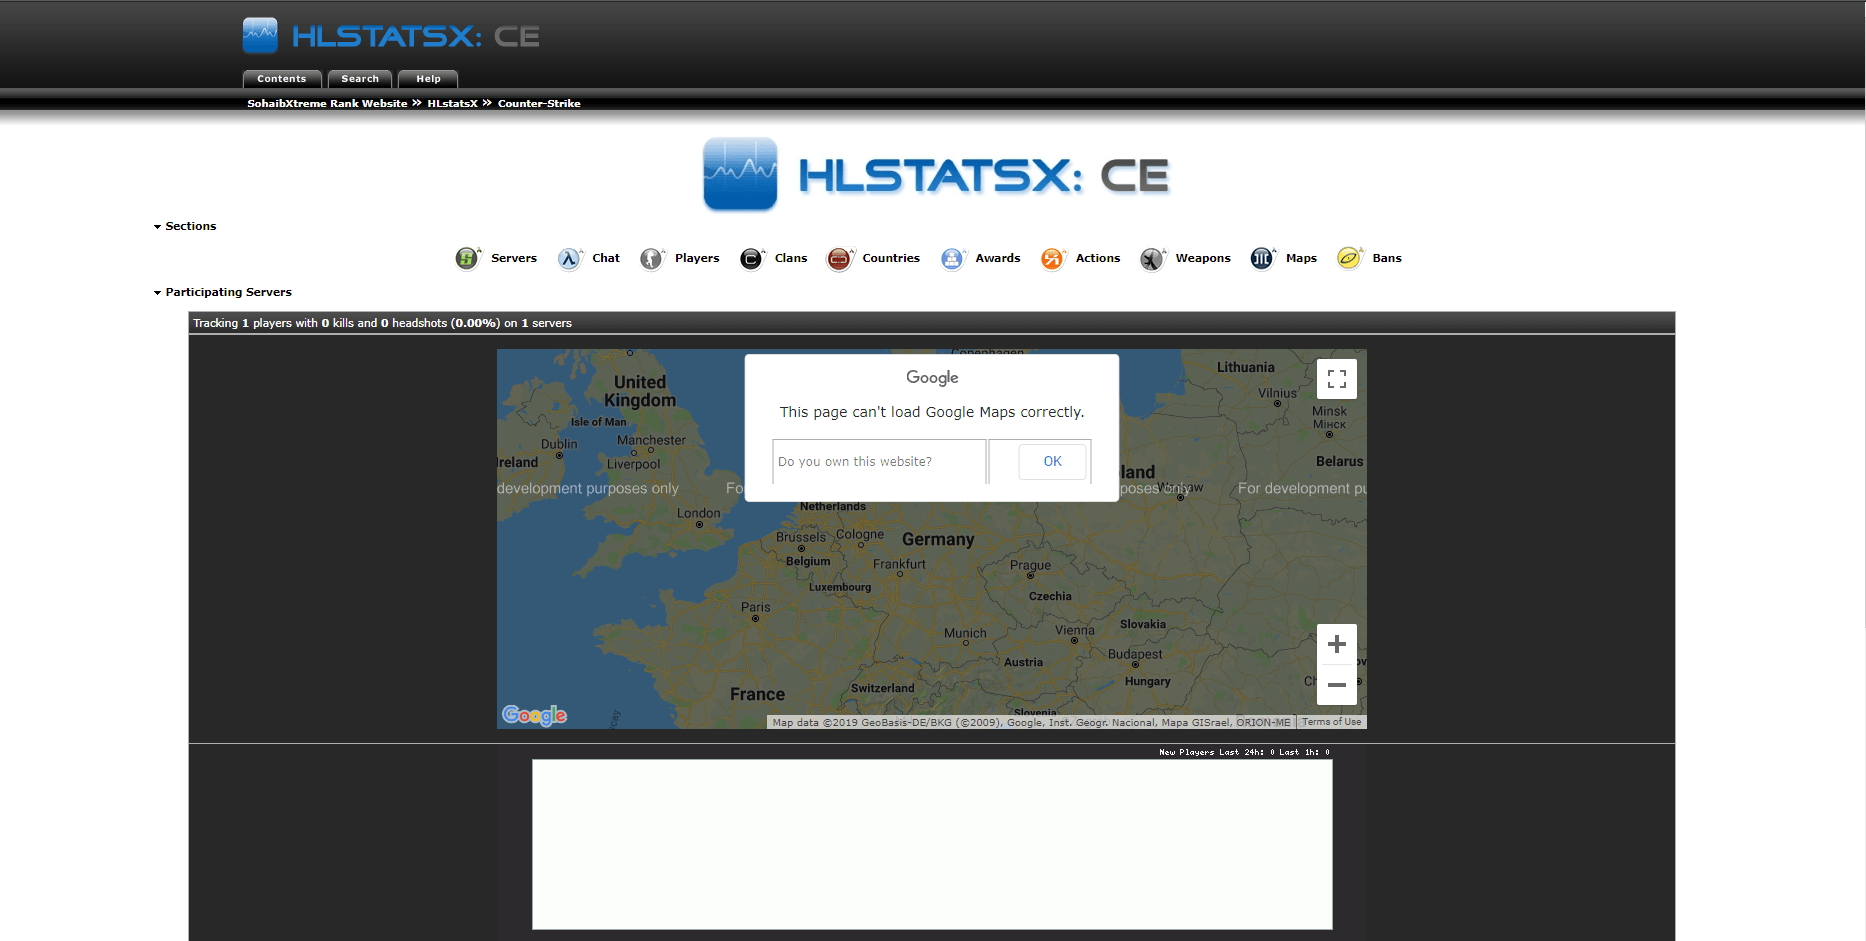 How To Install HlStatsX On Web With Adding Counter-Strike Server [ 2k19 ]